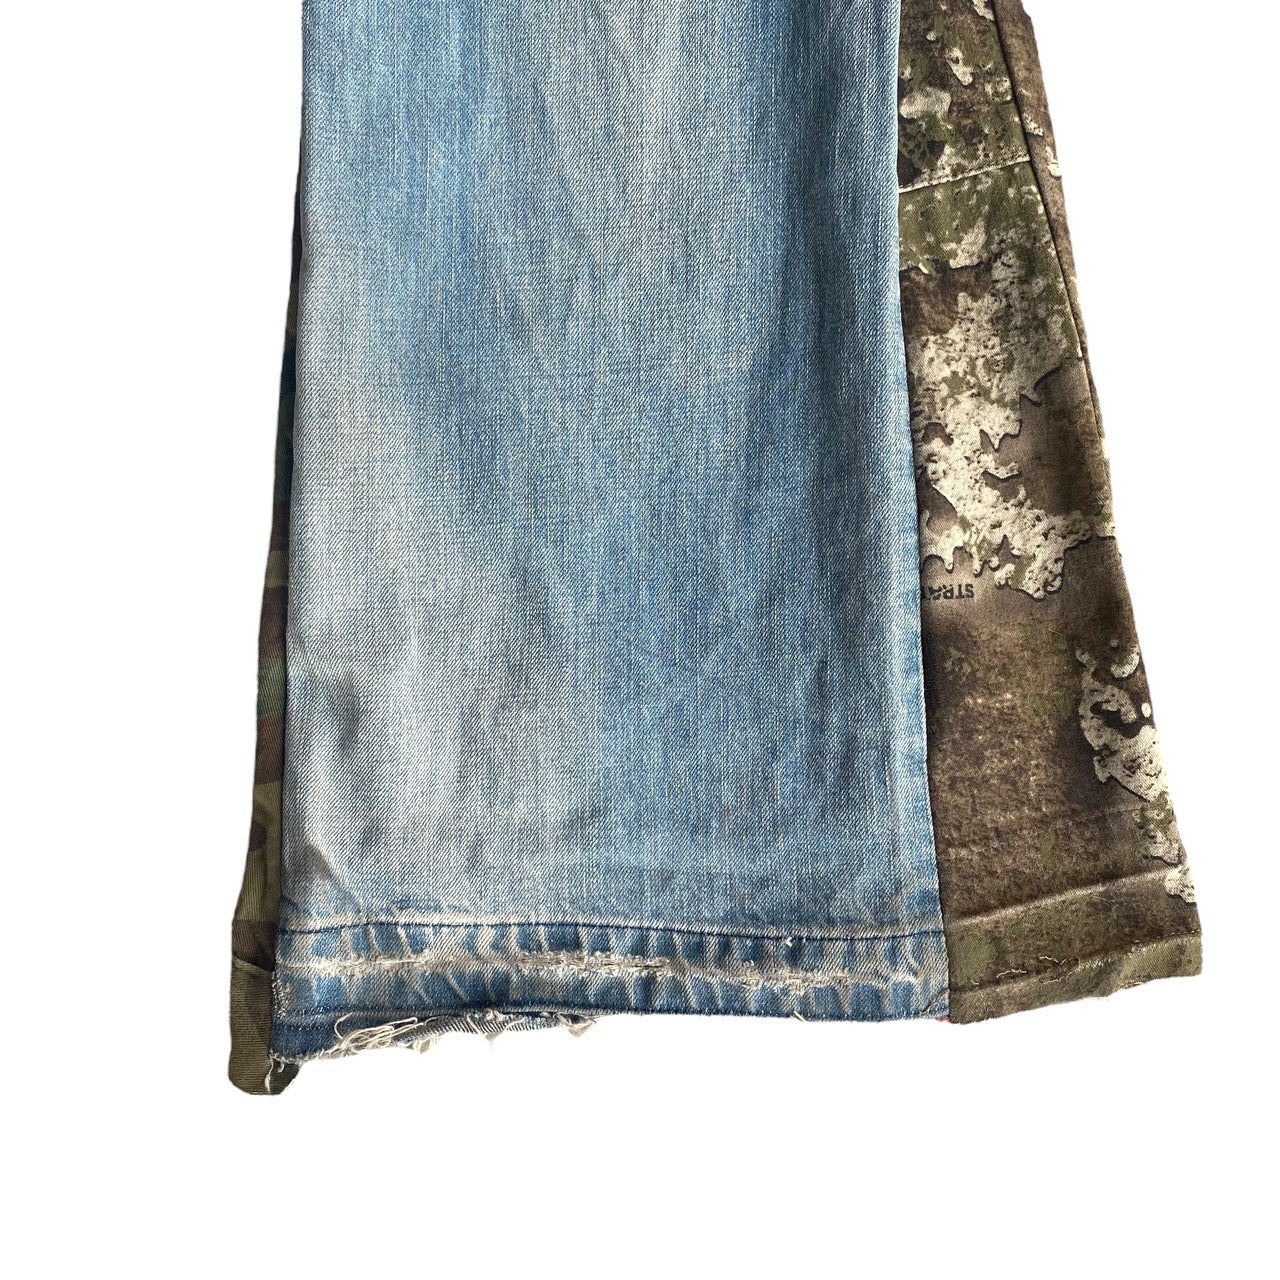 Levi's 511 Custom Reworked Flare Panel Pocket Forest Camo Jeans by Archive.Grn